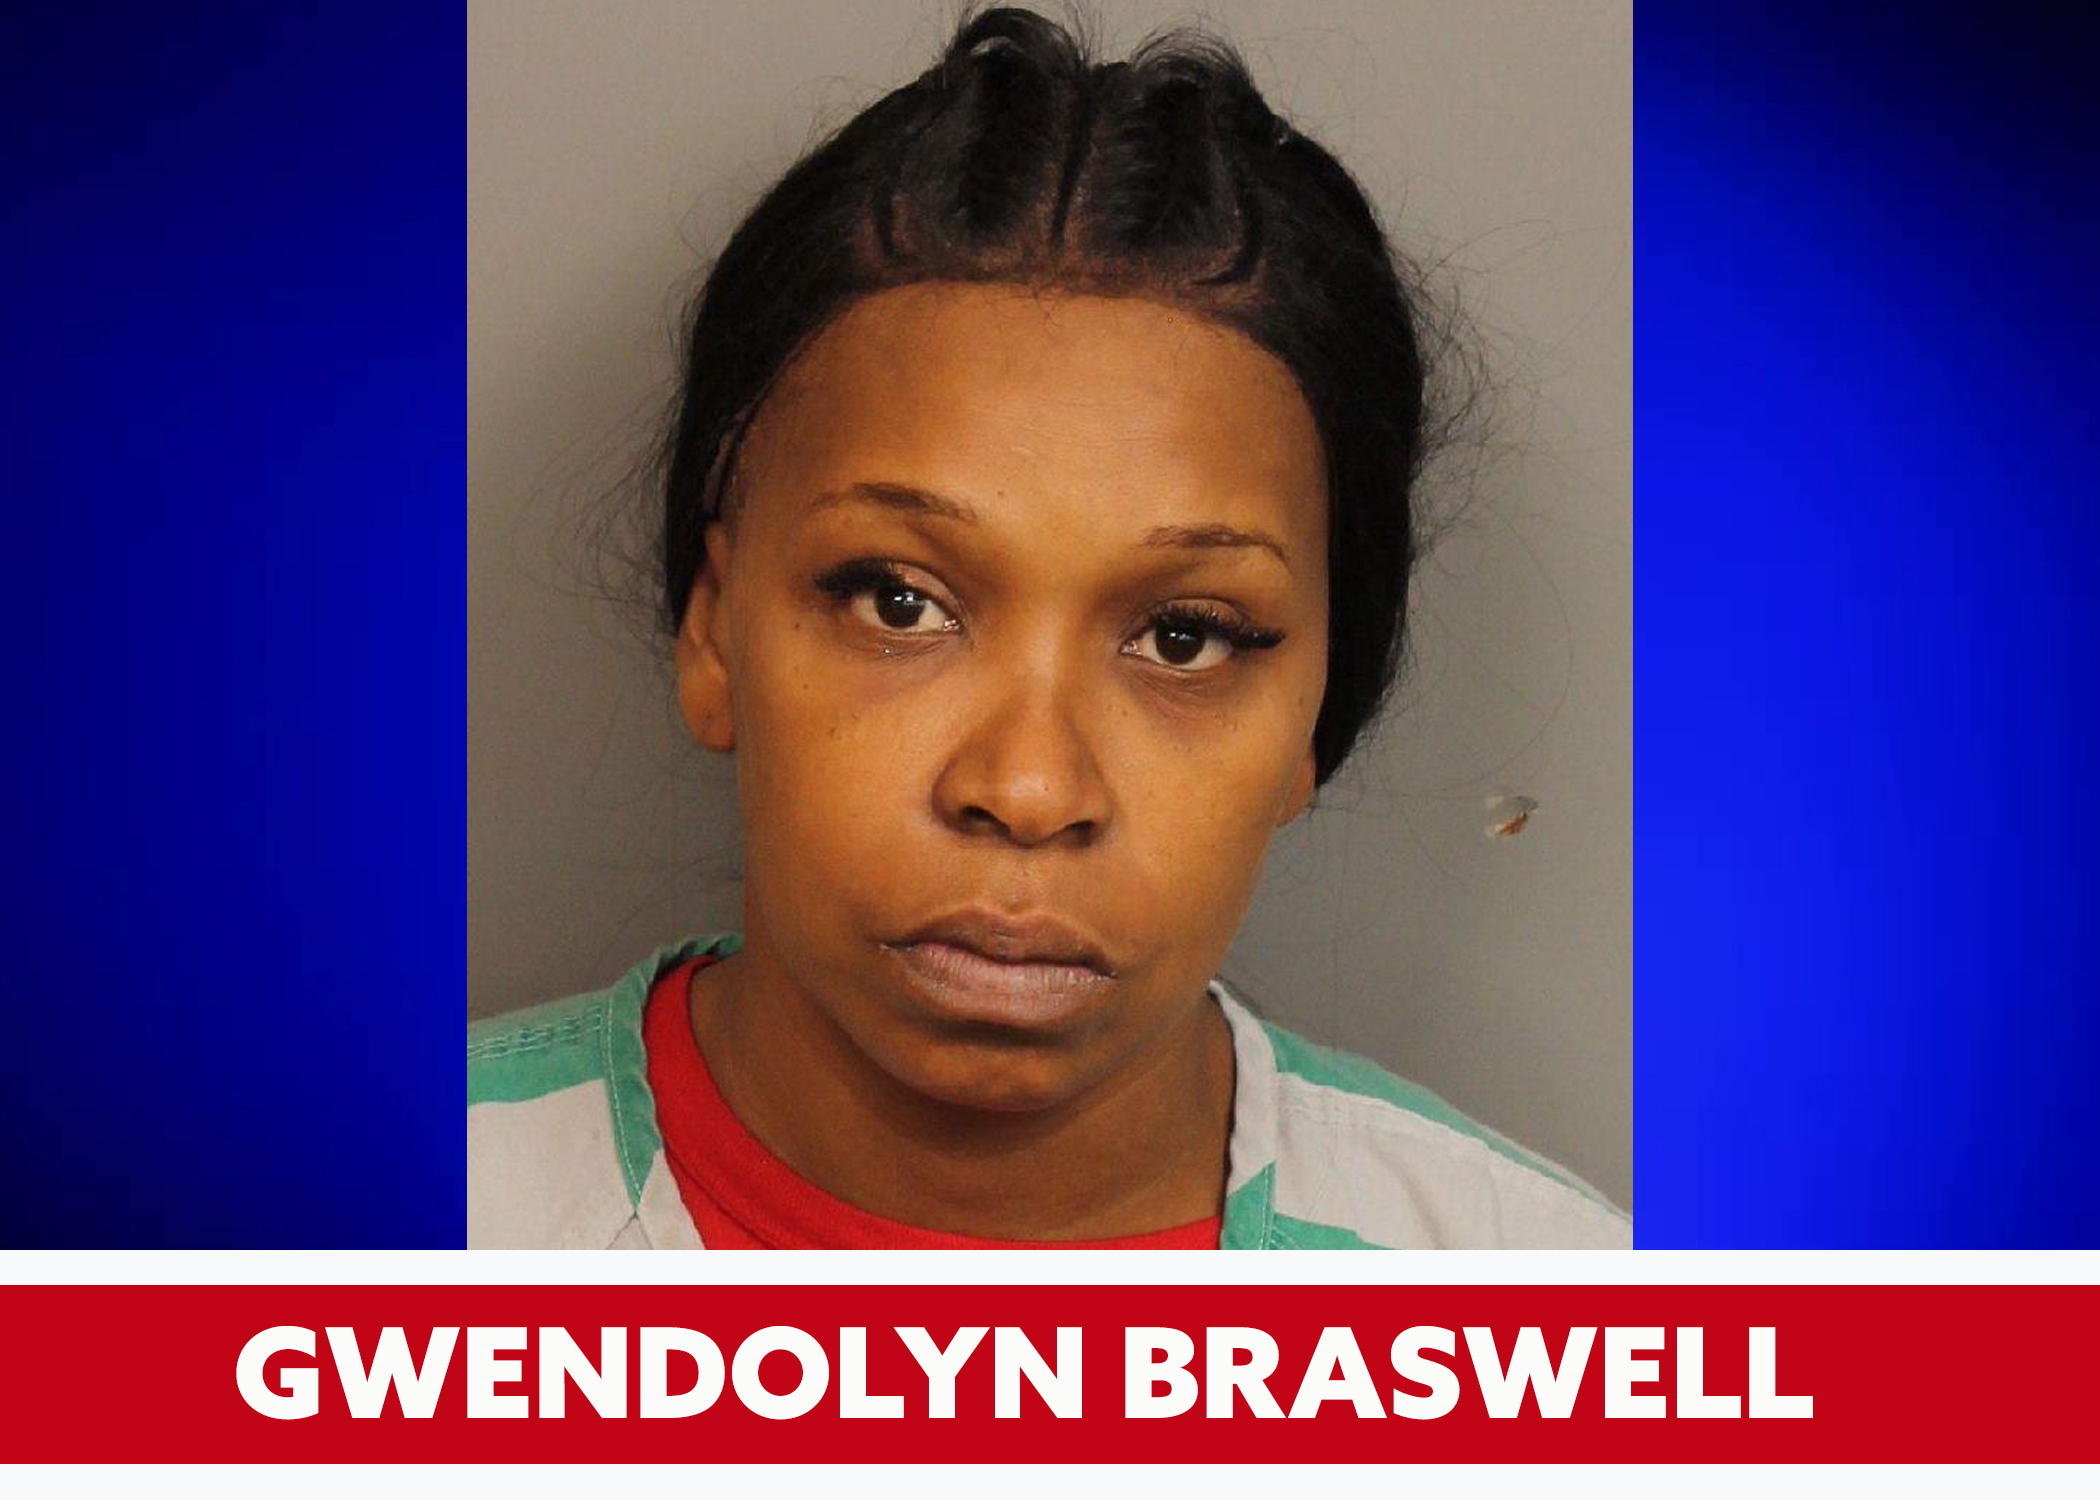 Woman arrested last year in Trussville Home Depot 'drive-thru burglary' now arrested in Hoover